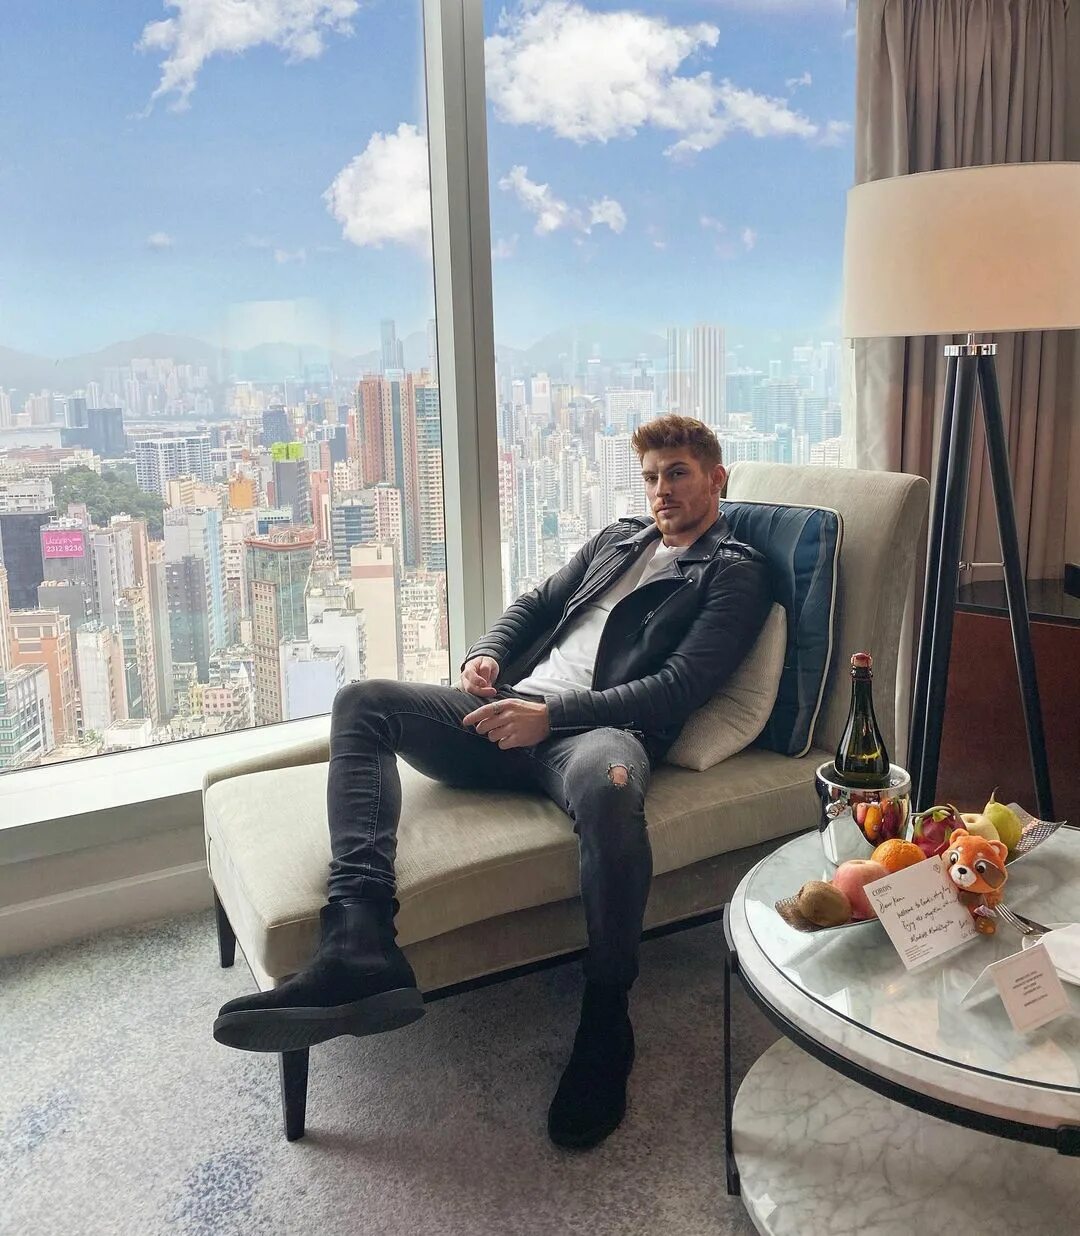 KEN BEK 肯-白 克 в Instagram: "Staycation time 🤩 🍾 🌟 ❤ At this day and...